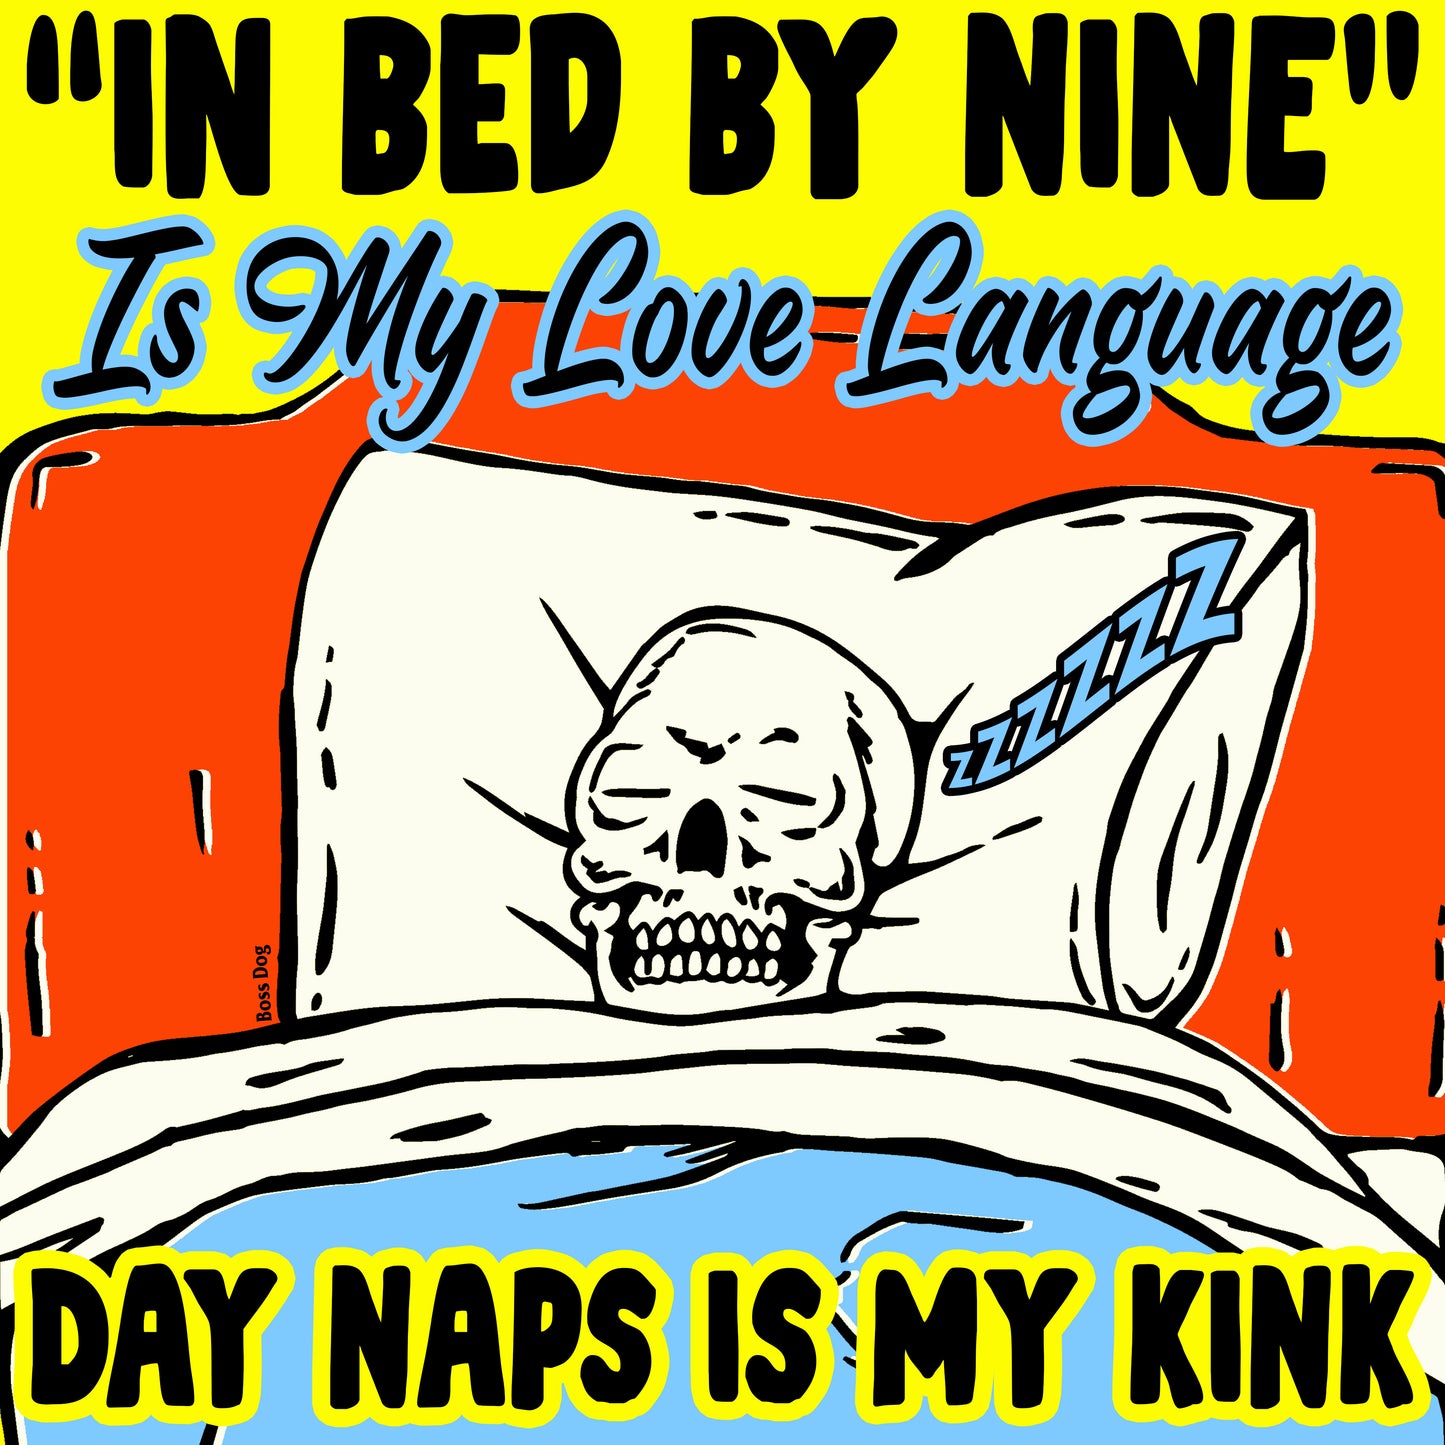 In Bed By Nine Print